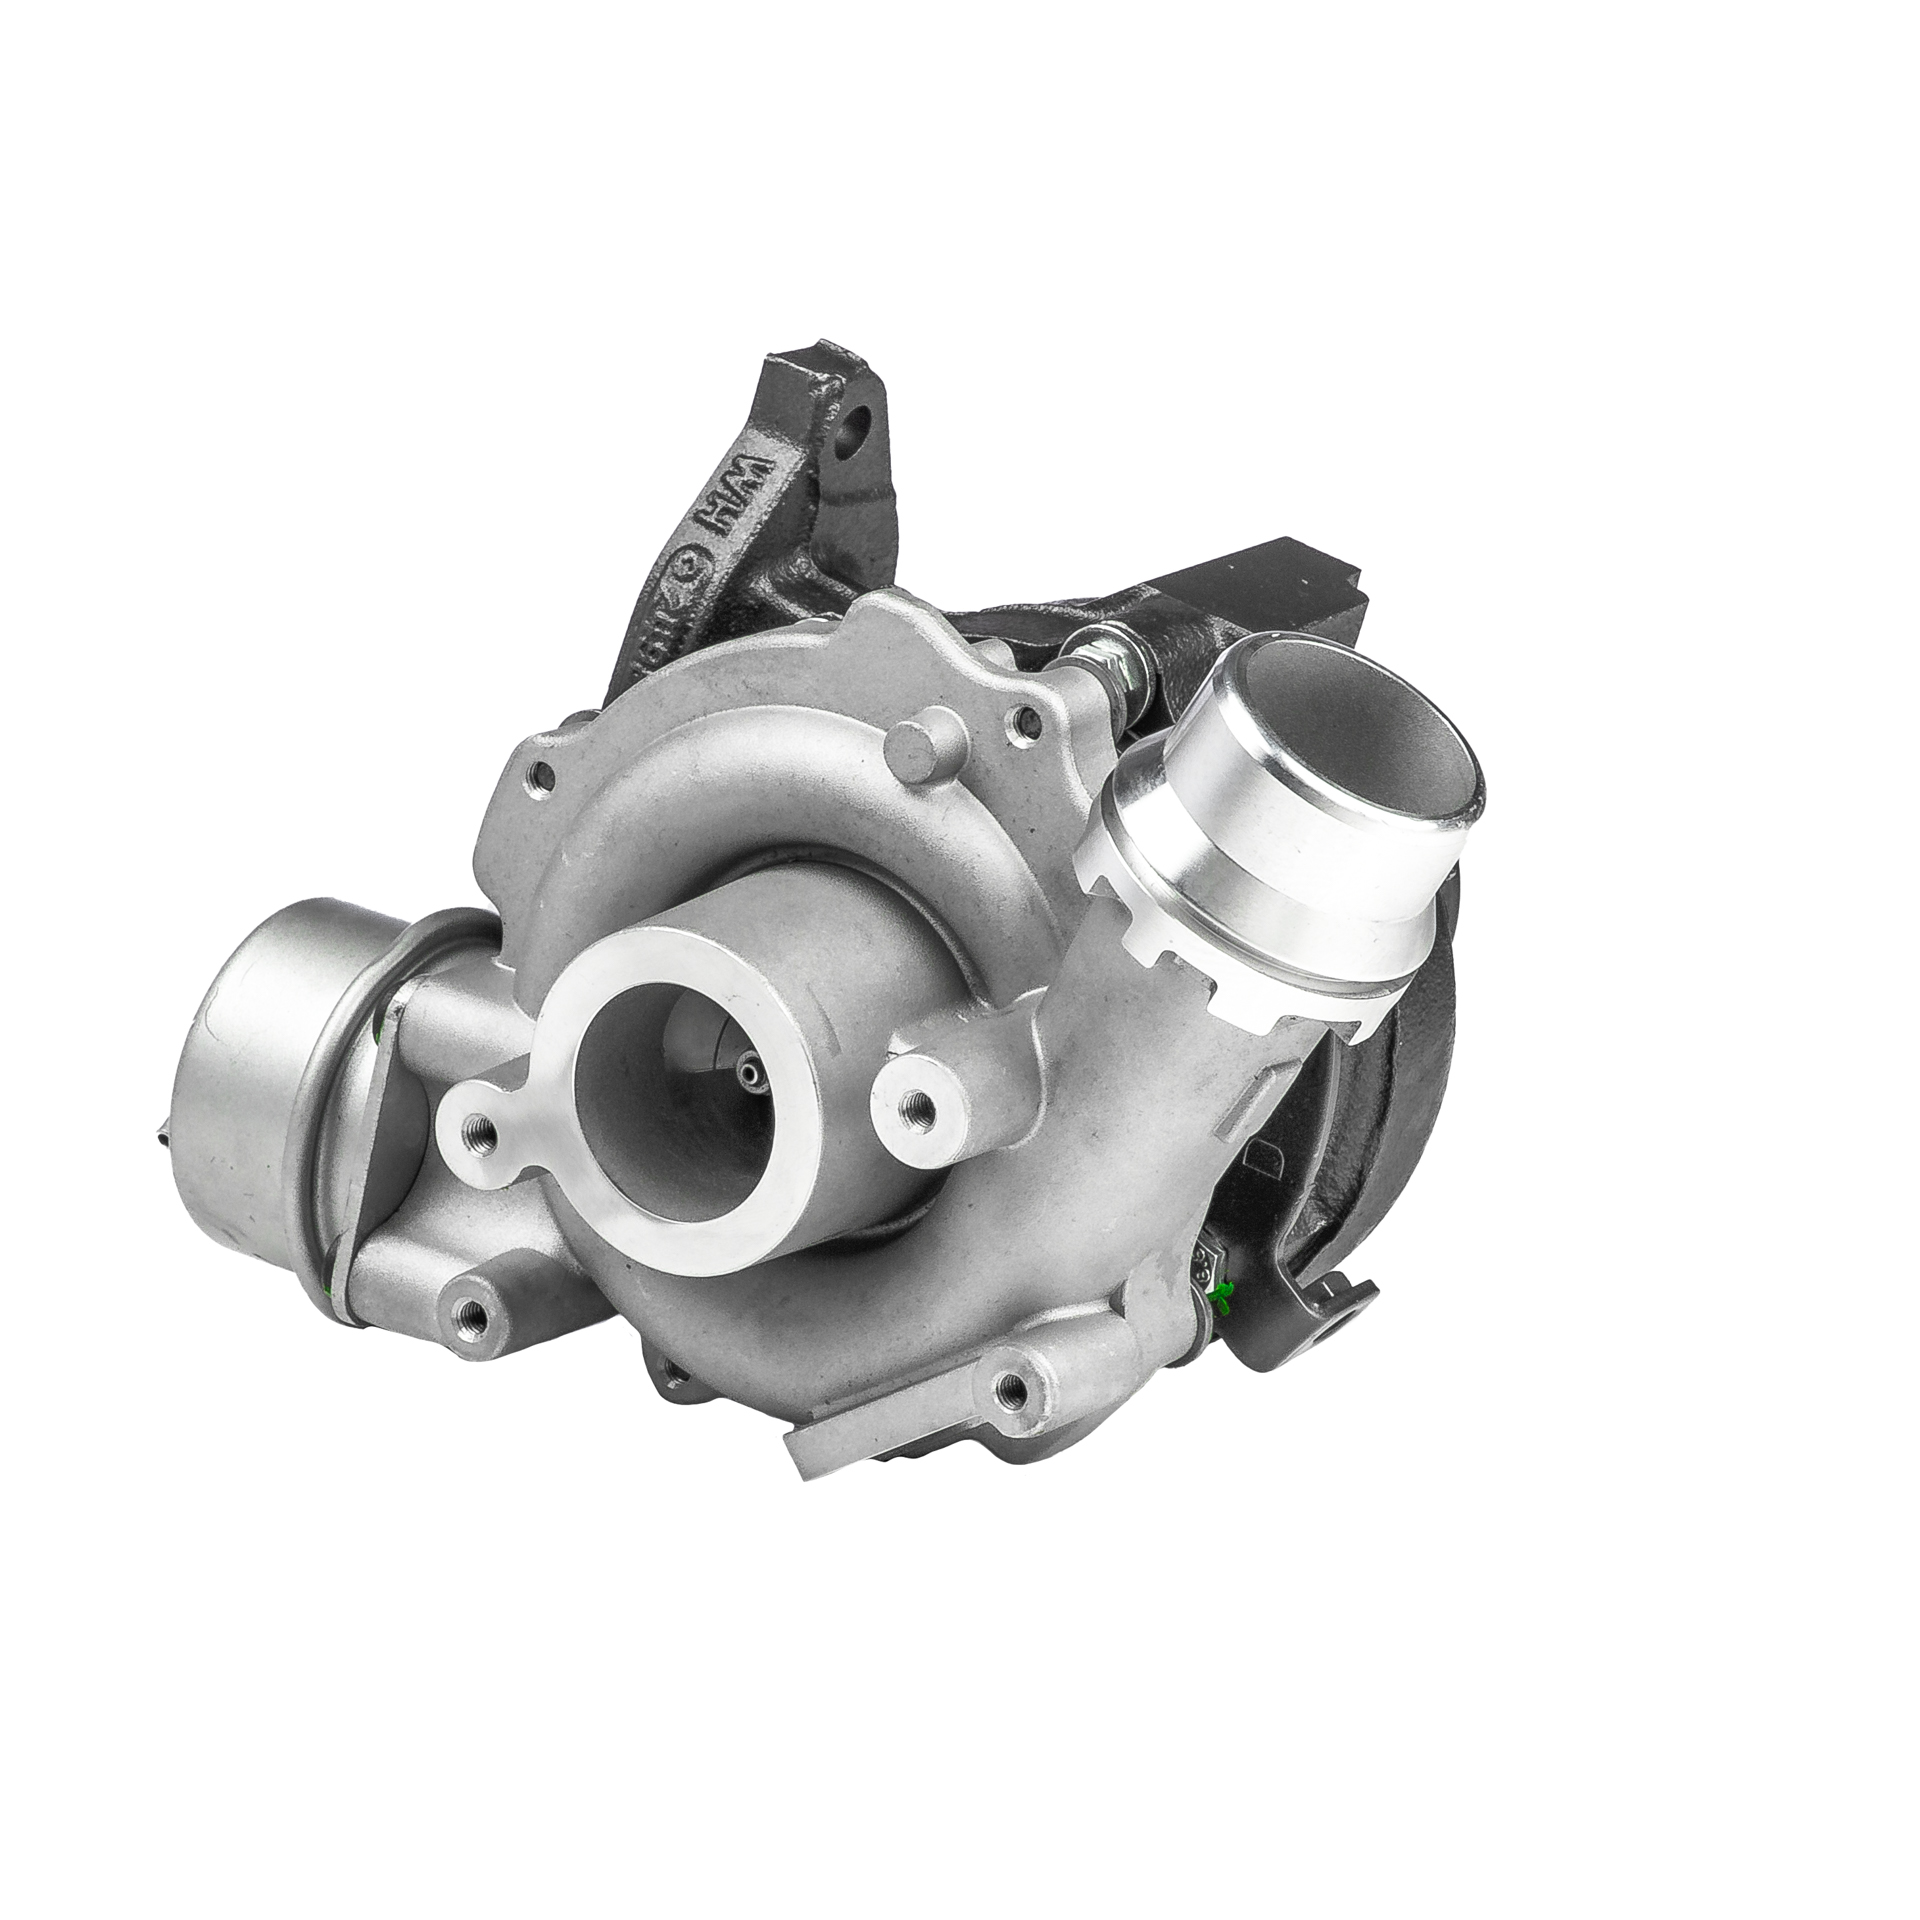 54389880006RS BR Turbo Turbocharger - buy online